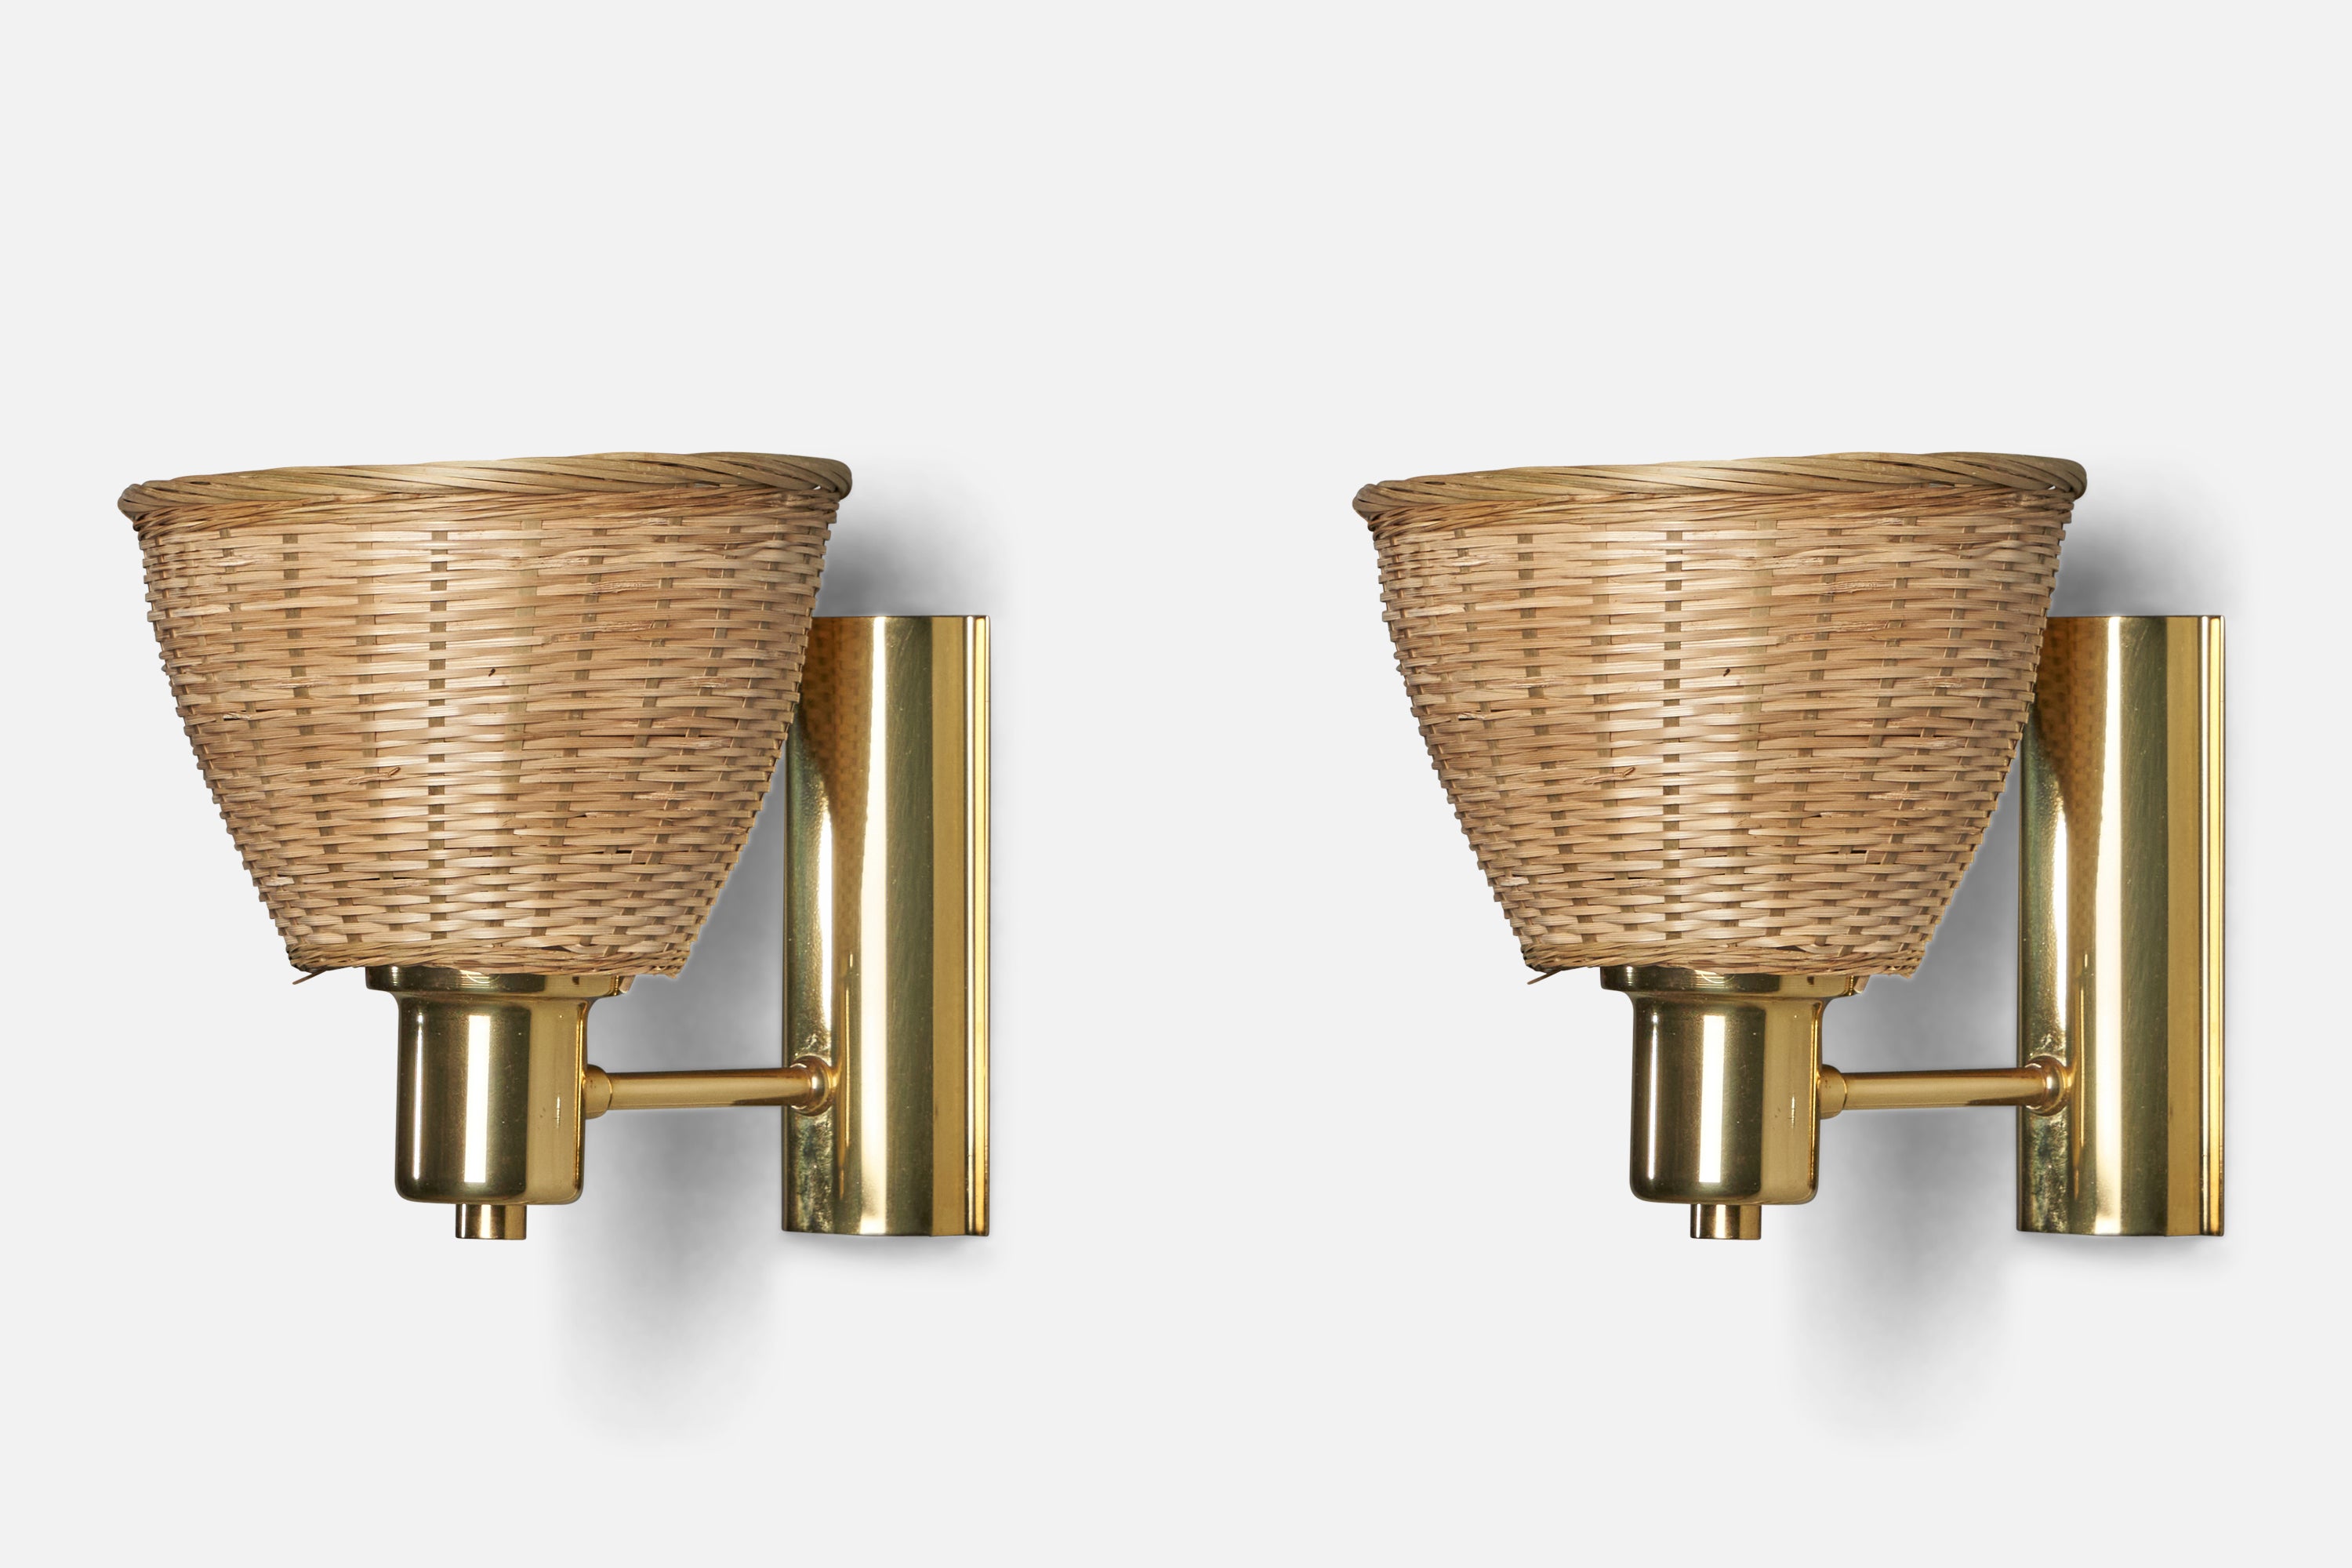 A pair of brass and rattan wall lights designed and produced in Sweden, c. 1970s.

Overall Dimensions (inches): 7” H x 6.75” W x 8” D
Back Plate Dimensions (inches): 5.9” H x 2.75” W x 1.15” D
Bulb Specifications: E-26 Bulb
Number of Sockets: 1